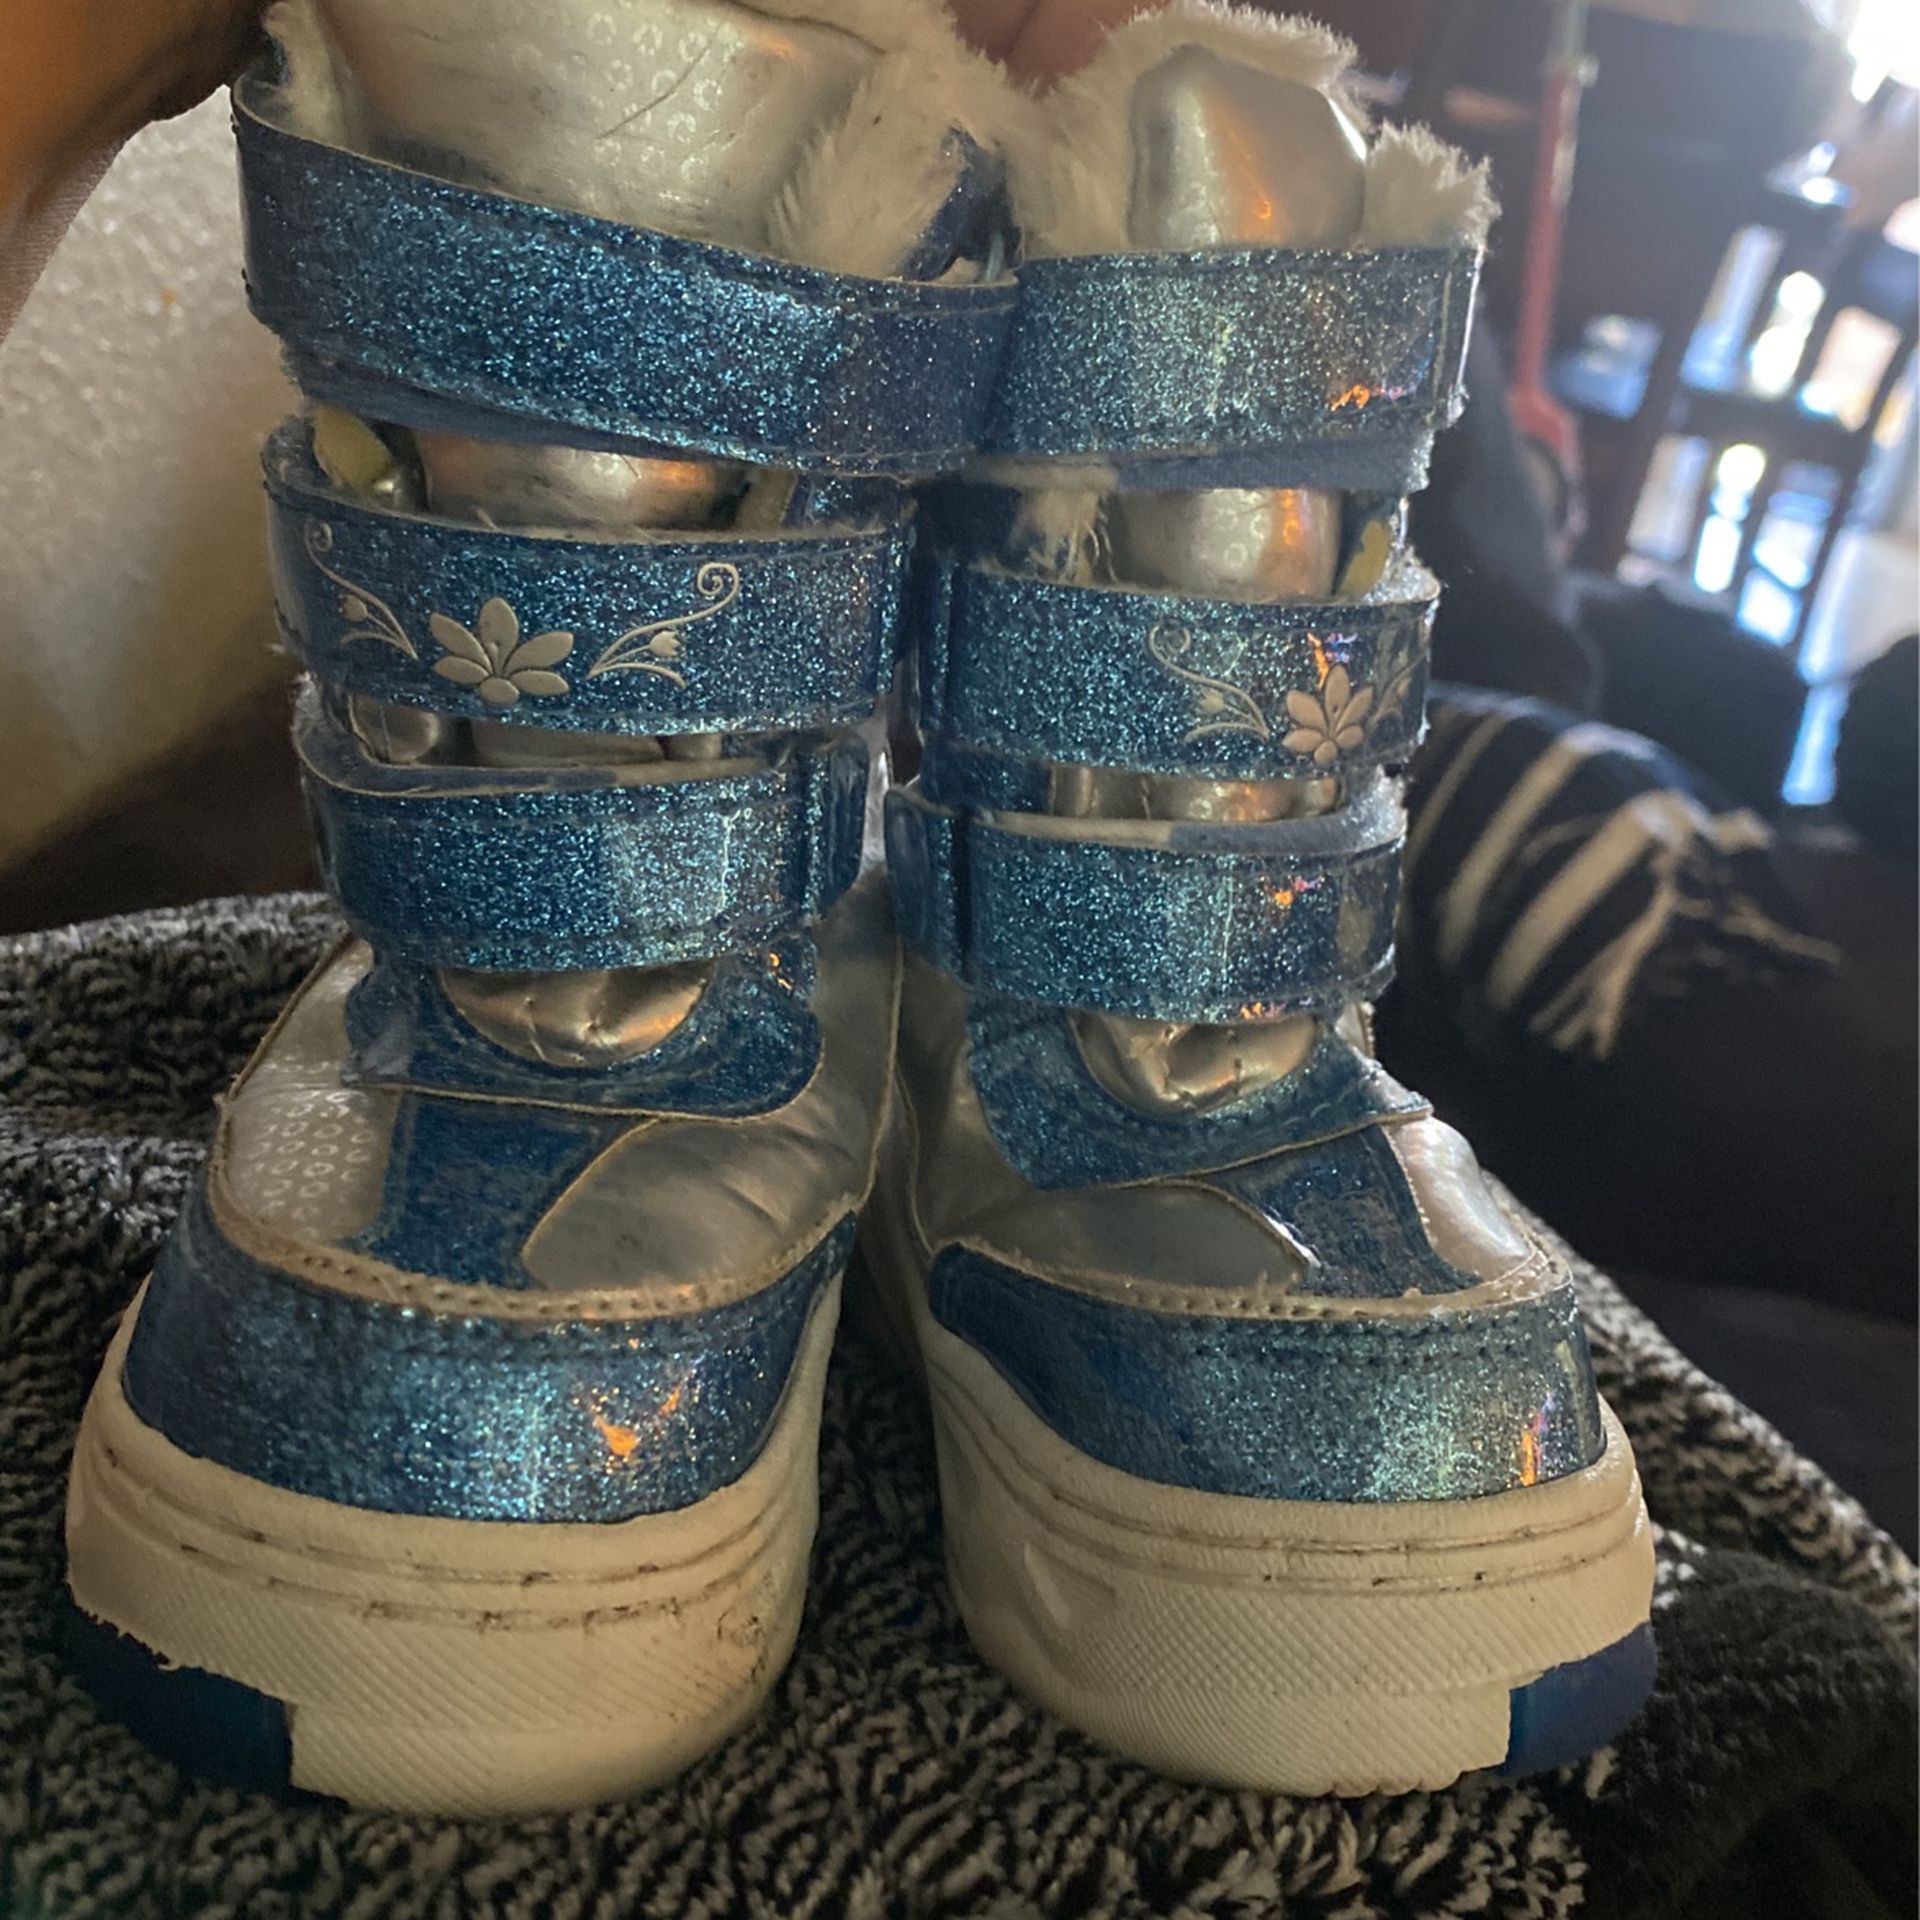 Frozen Snow Boots Size 6c Only $10